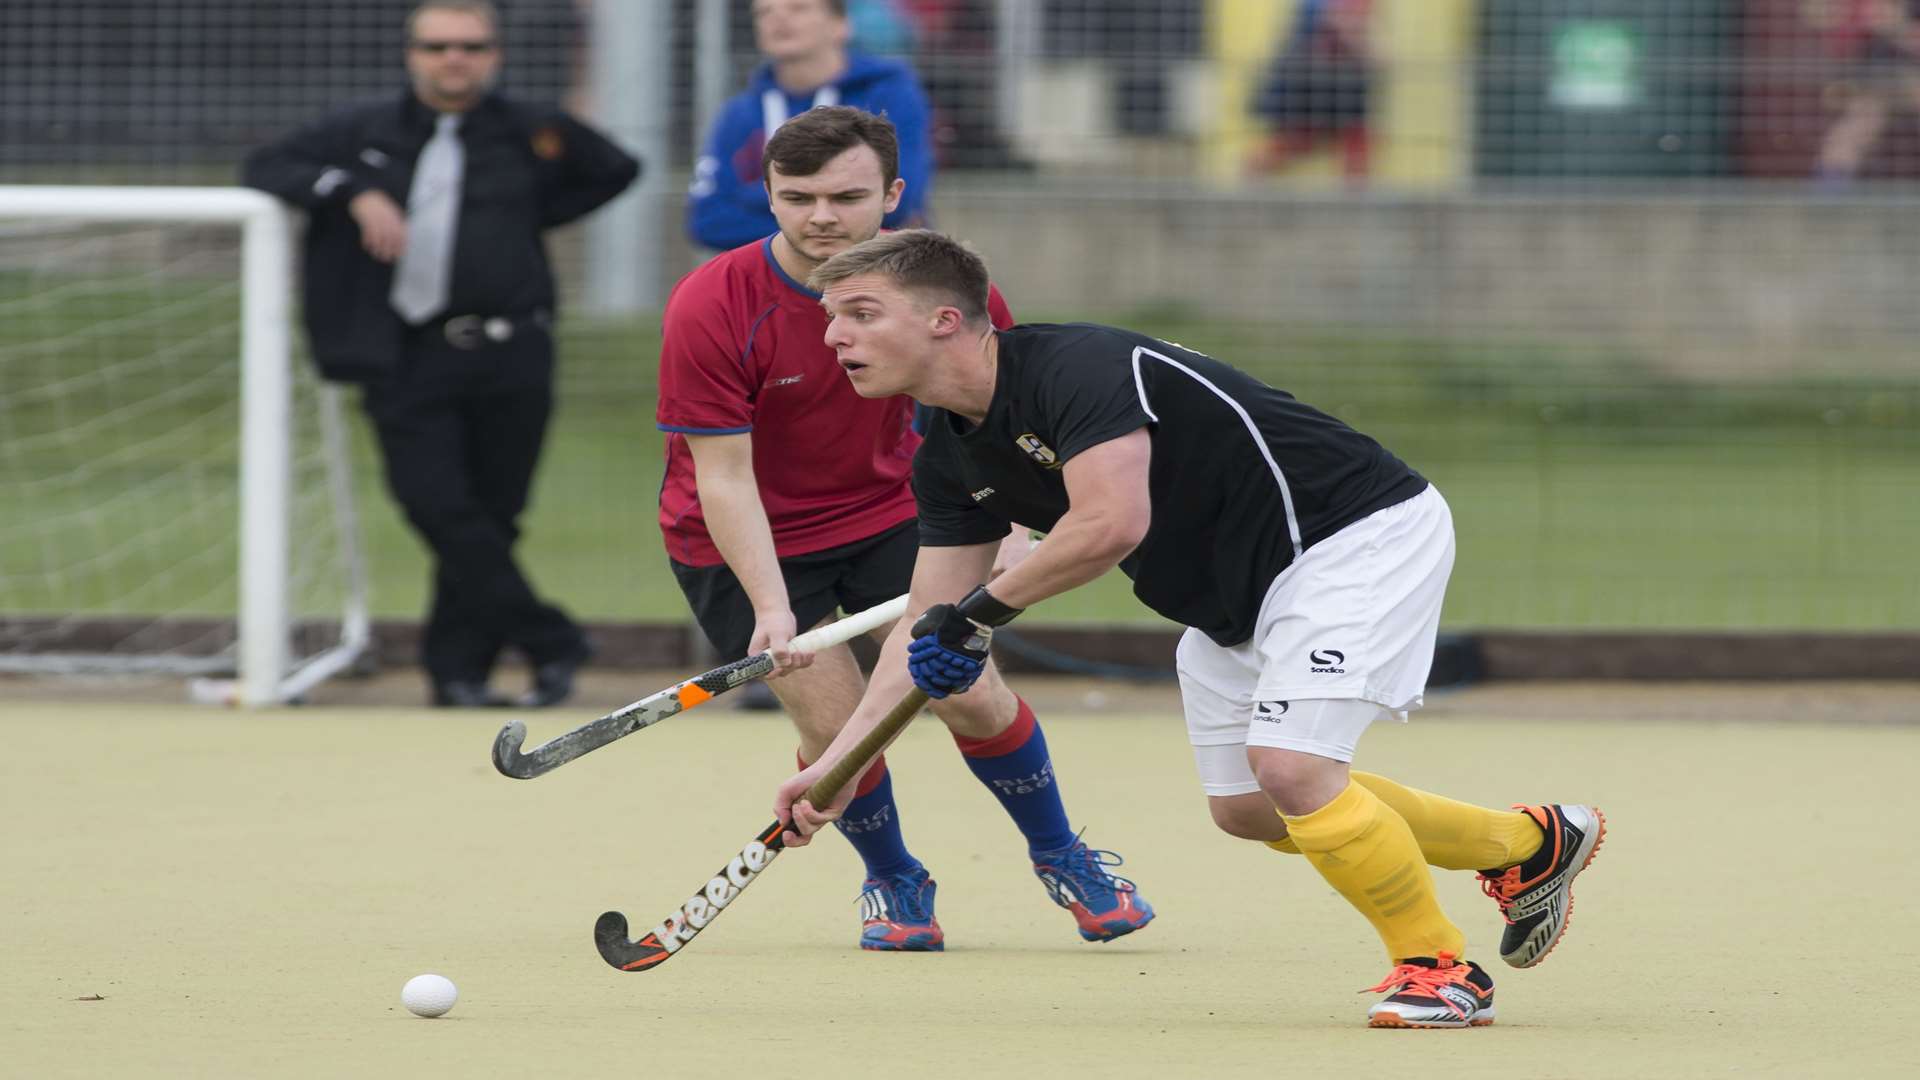 Hockey action on the astroturf at Gravesend Rugby Club Picture: Andy Payton